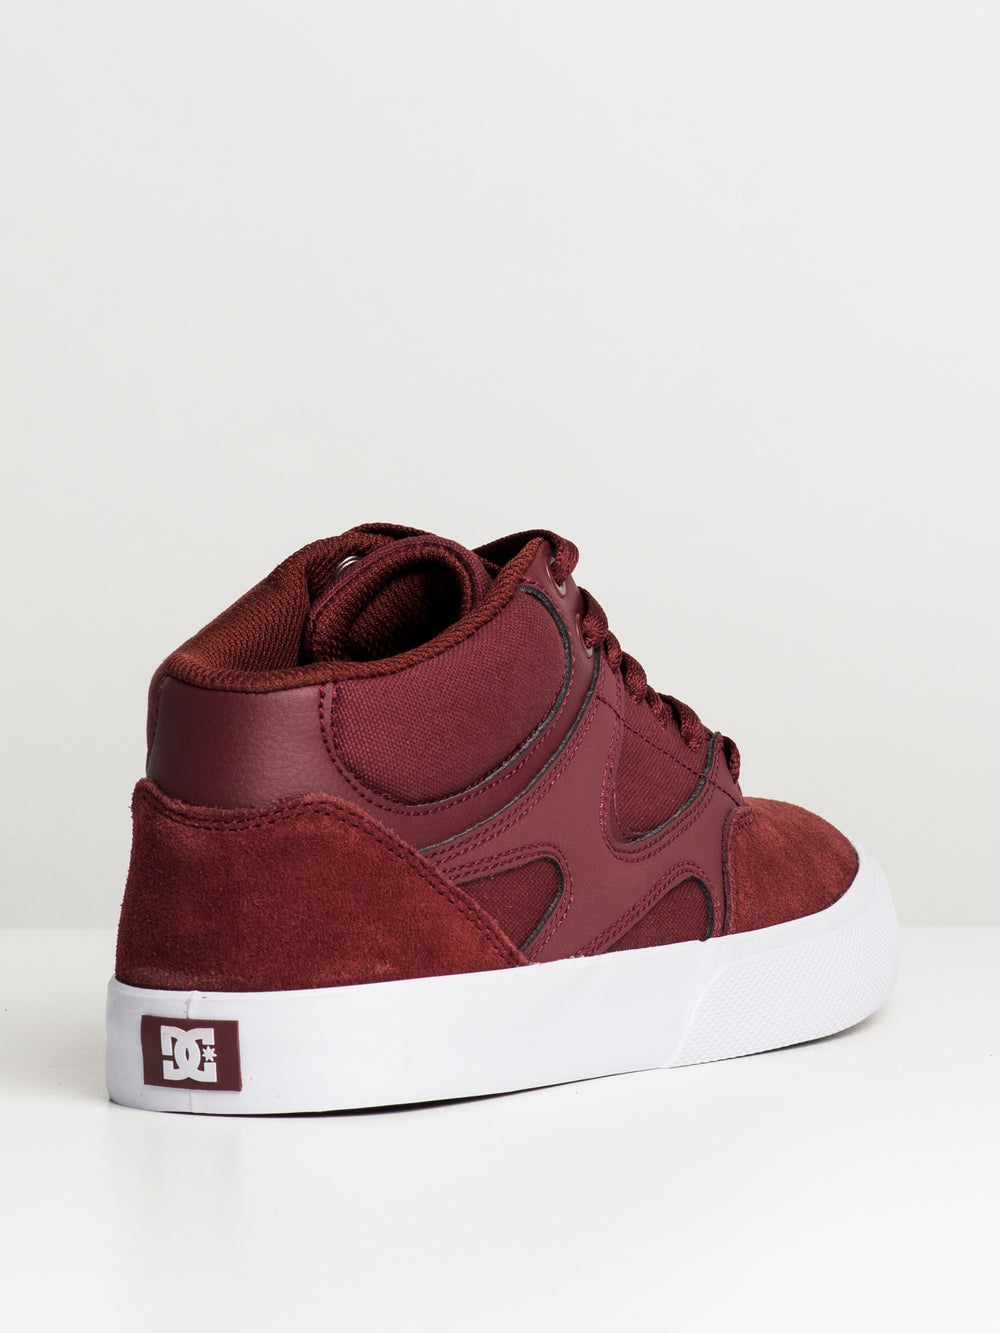 MENS DC SHOES KALIS VULC MID SNEAKER - CLEARANCE